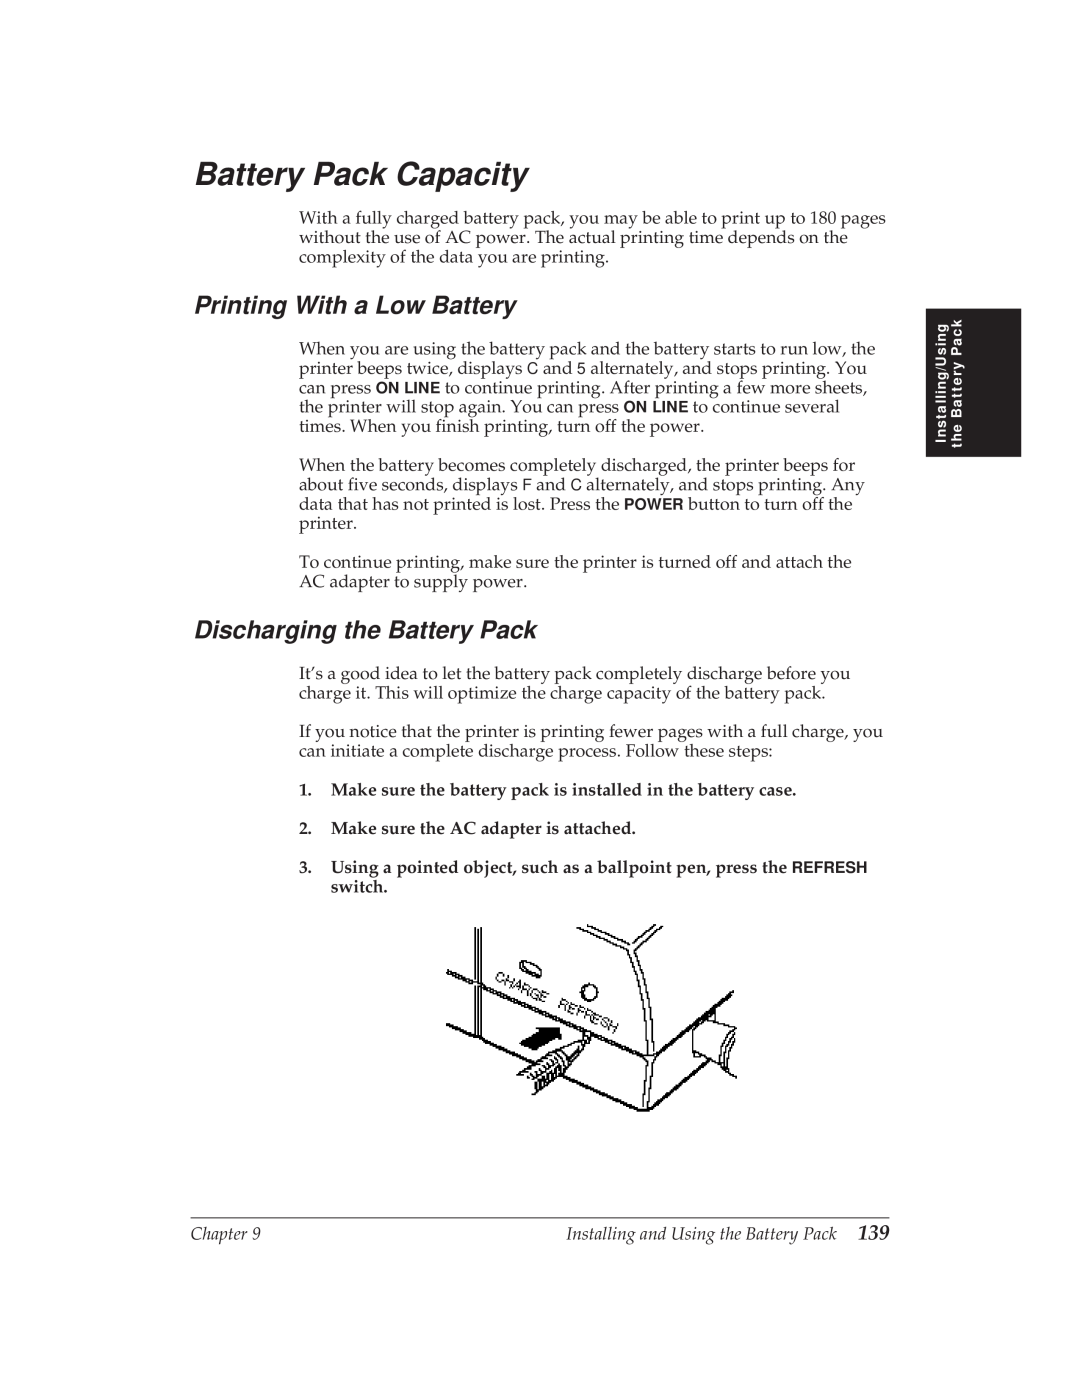 Canon BJ-30 manual Battery Pack Capacity, Printing With a Low Battery, Discharging the Battery Pack 